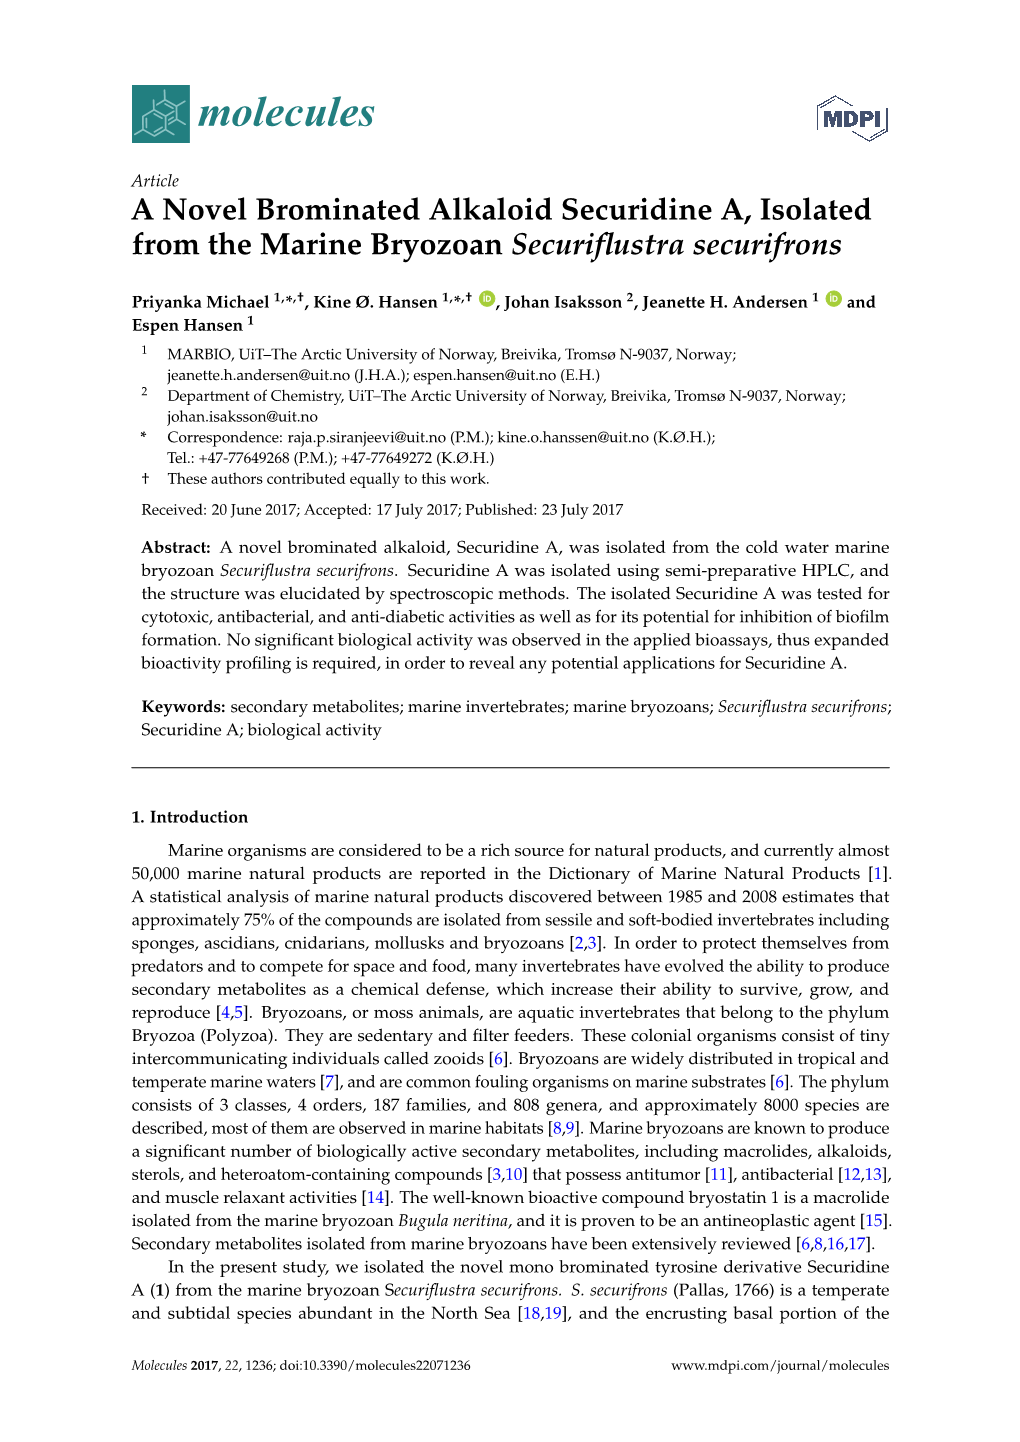 A Novel Brominated Alkaloid Securidine A, Isolated from the Marine Bryozoan Securiflustra Securifrons